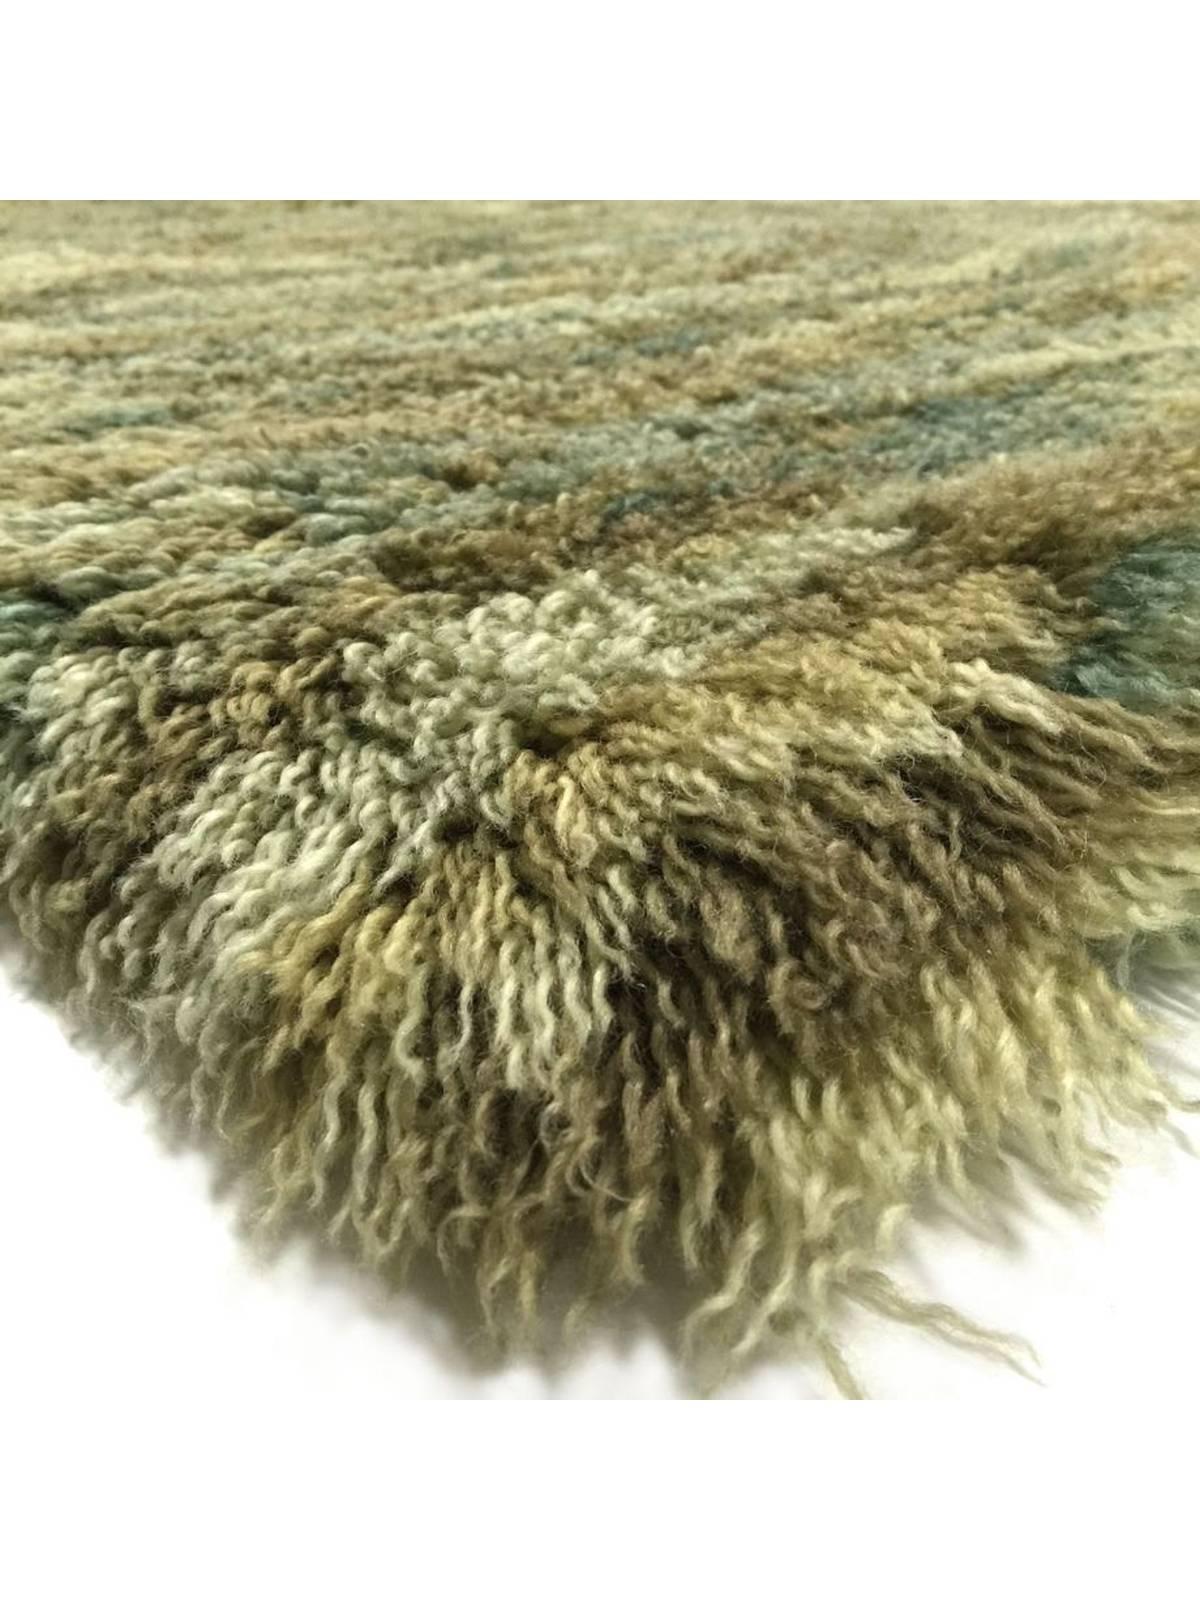 A unique blend of Angora and New Zealand wools give this handwoven shag carpet its lustre and softness. A mixture of teal, ivory, green, and tan create a soothing wave movement reminiscent of rippling water, with East Asian vibes.